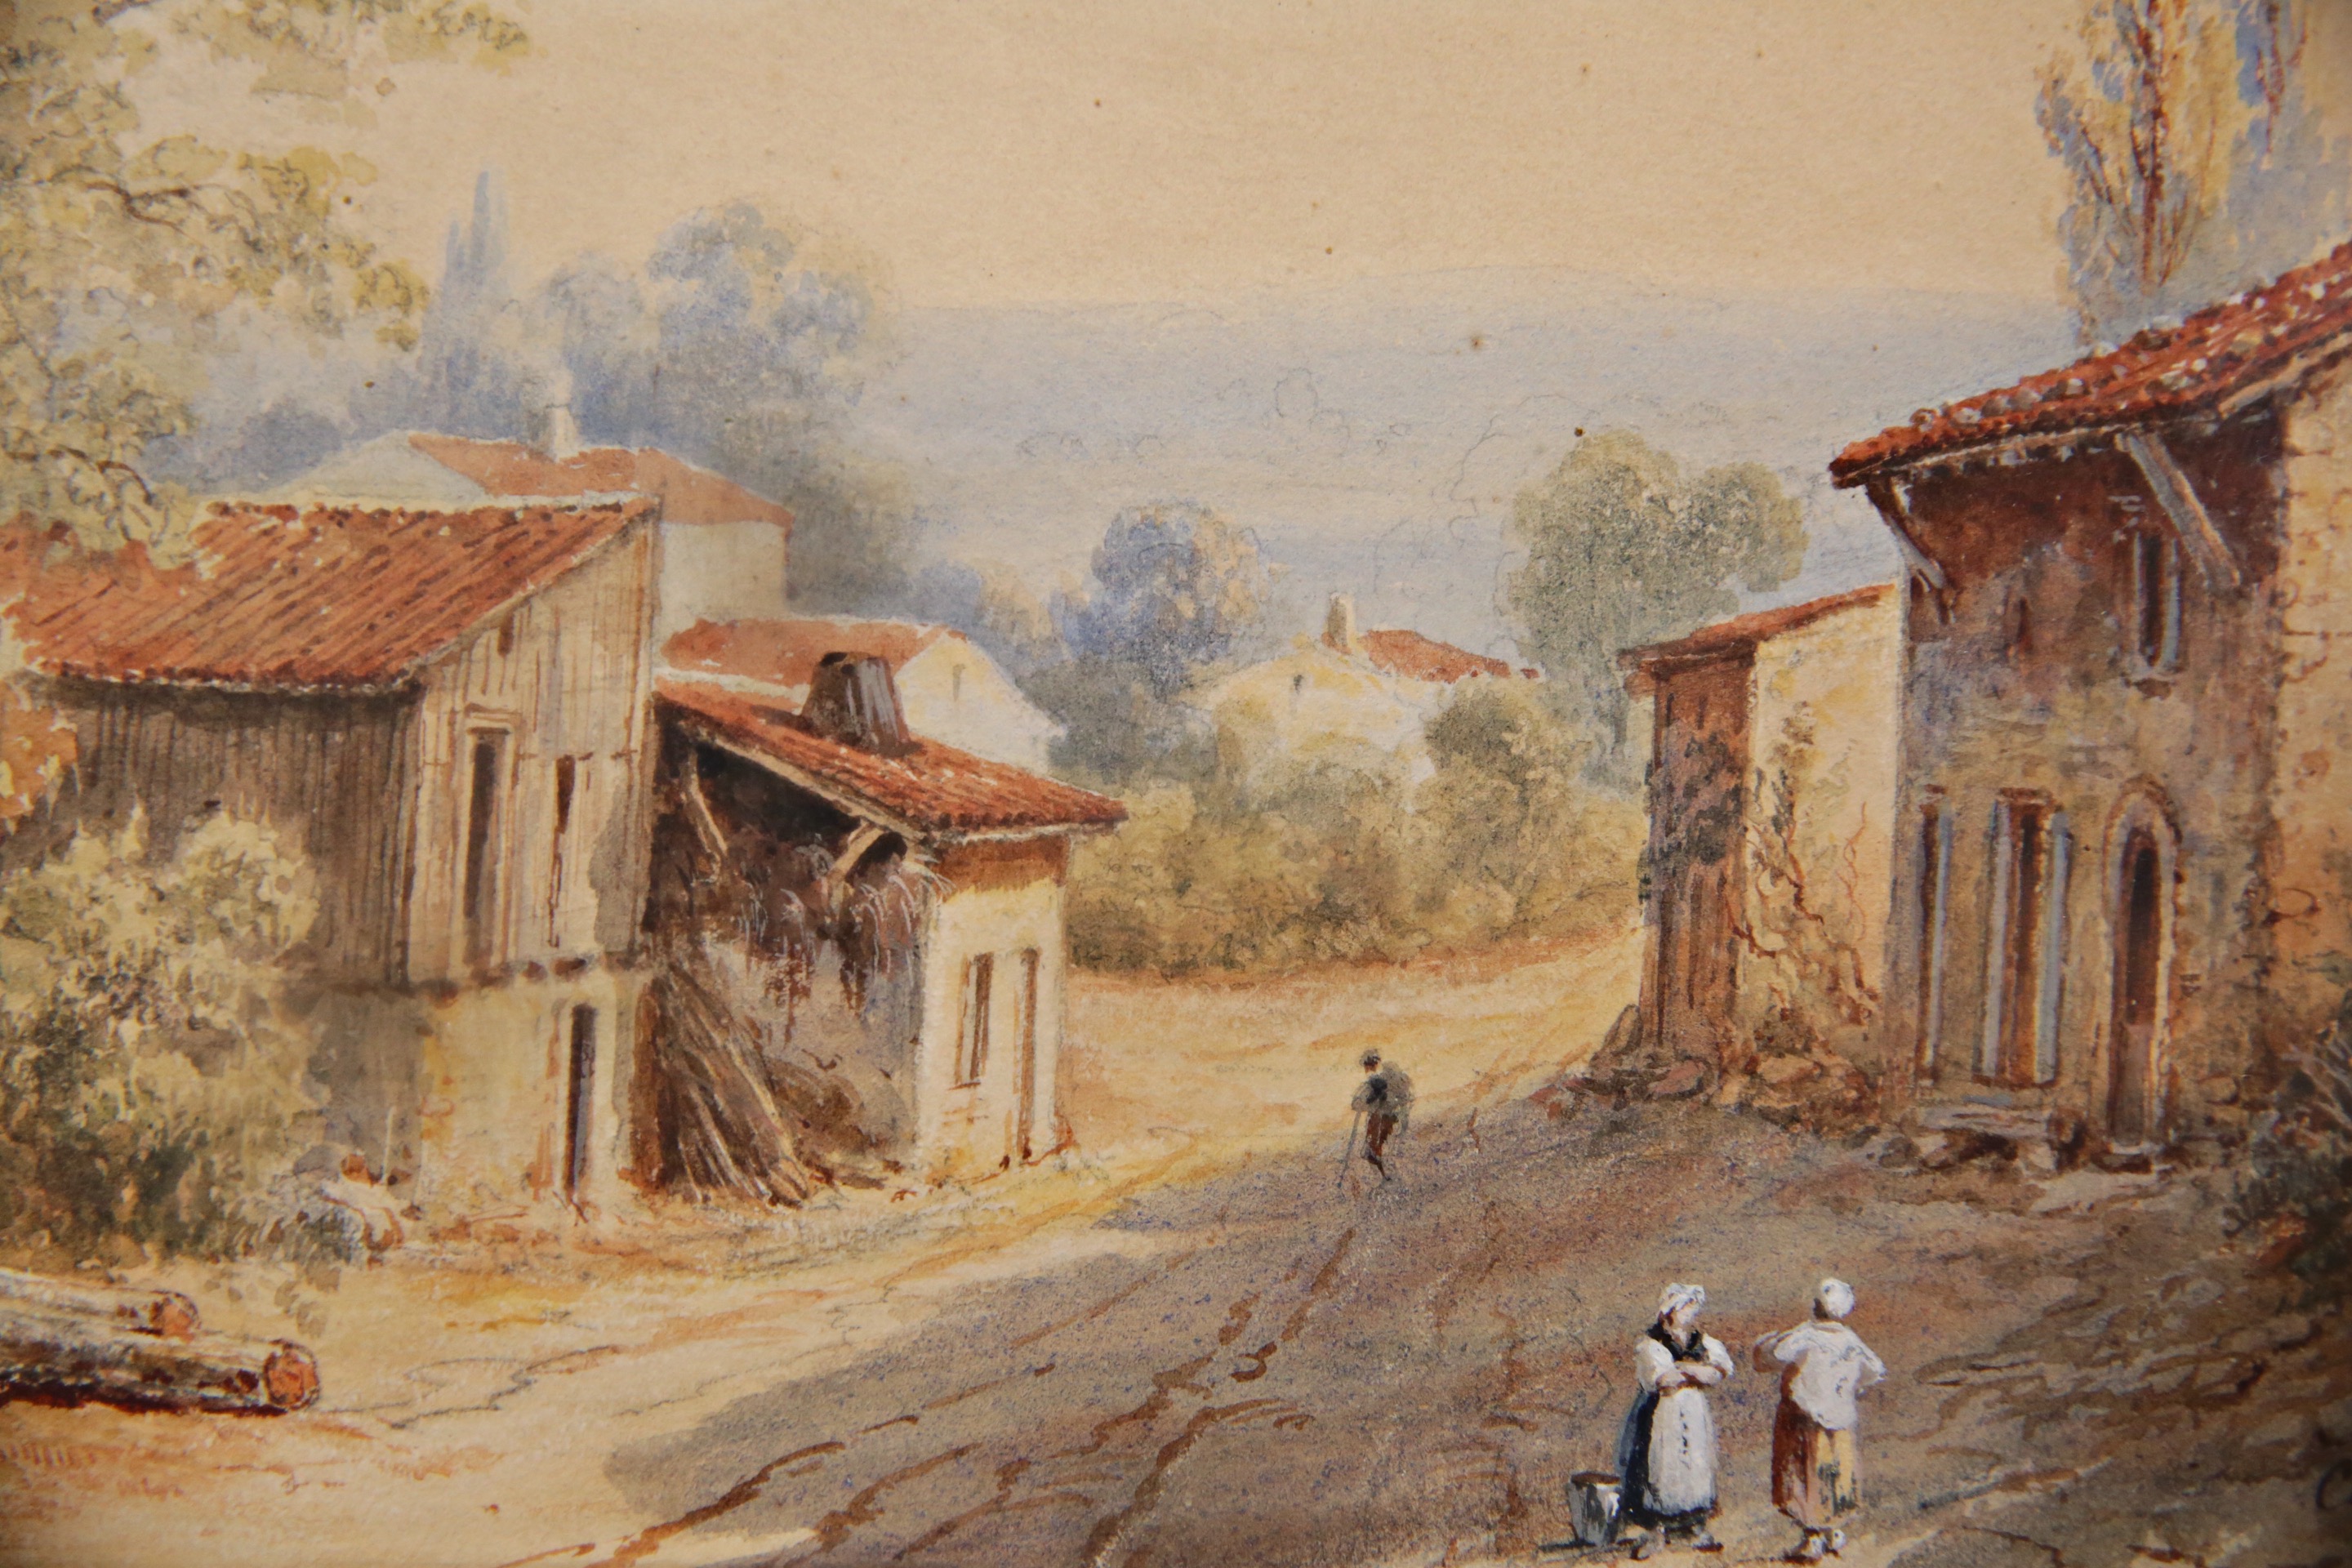 Francois Jules COLLIGNON (?-1850) "Rue de village", watercolor on paper, French painting,19th C. - Image 4 of 4